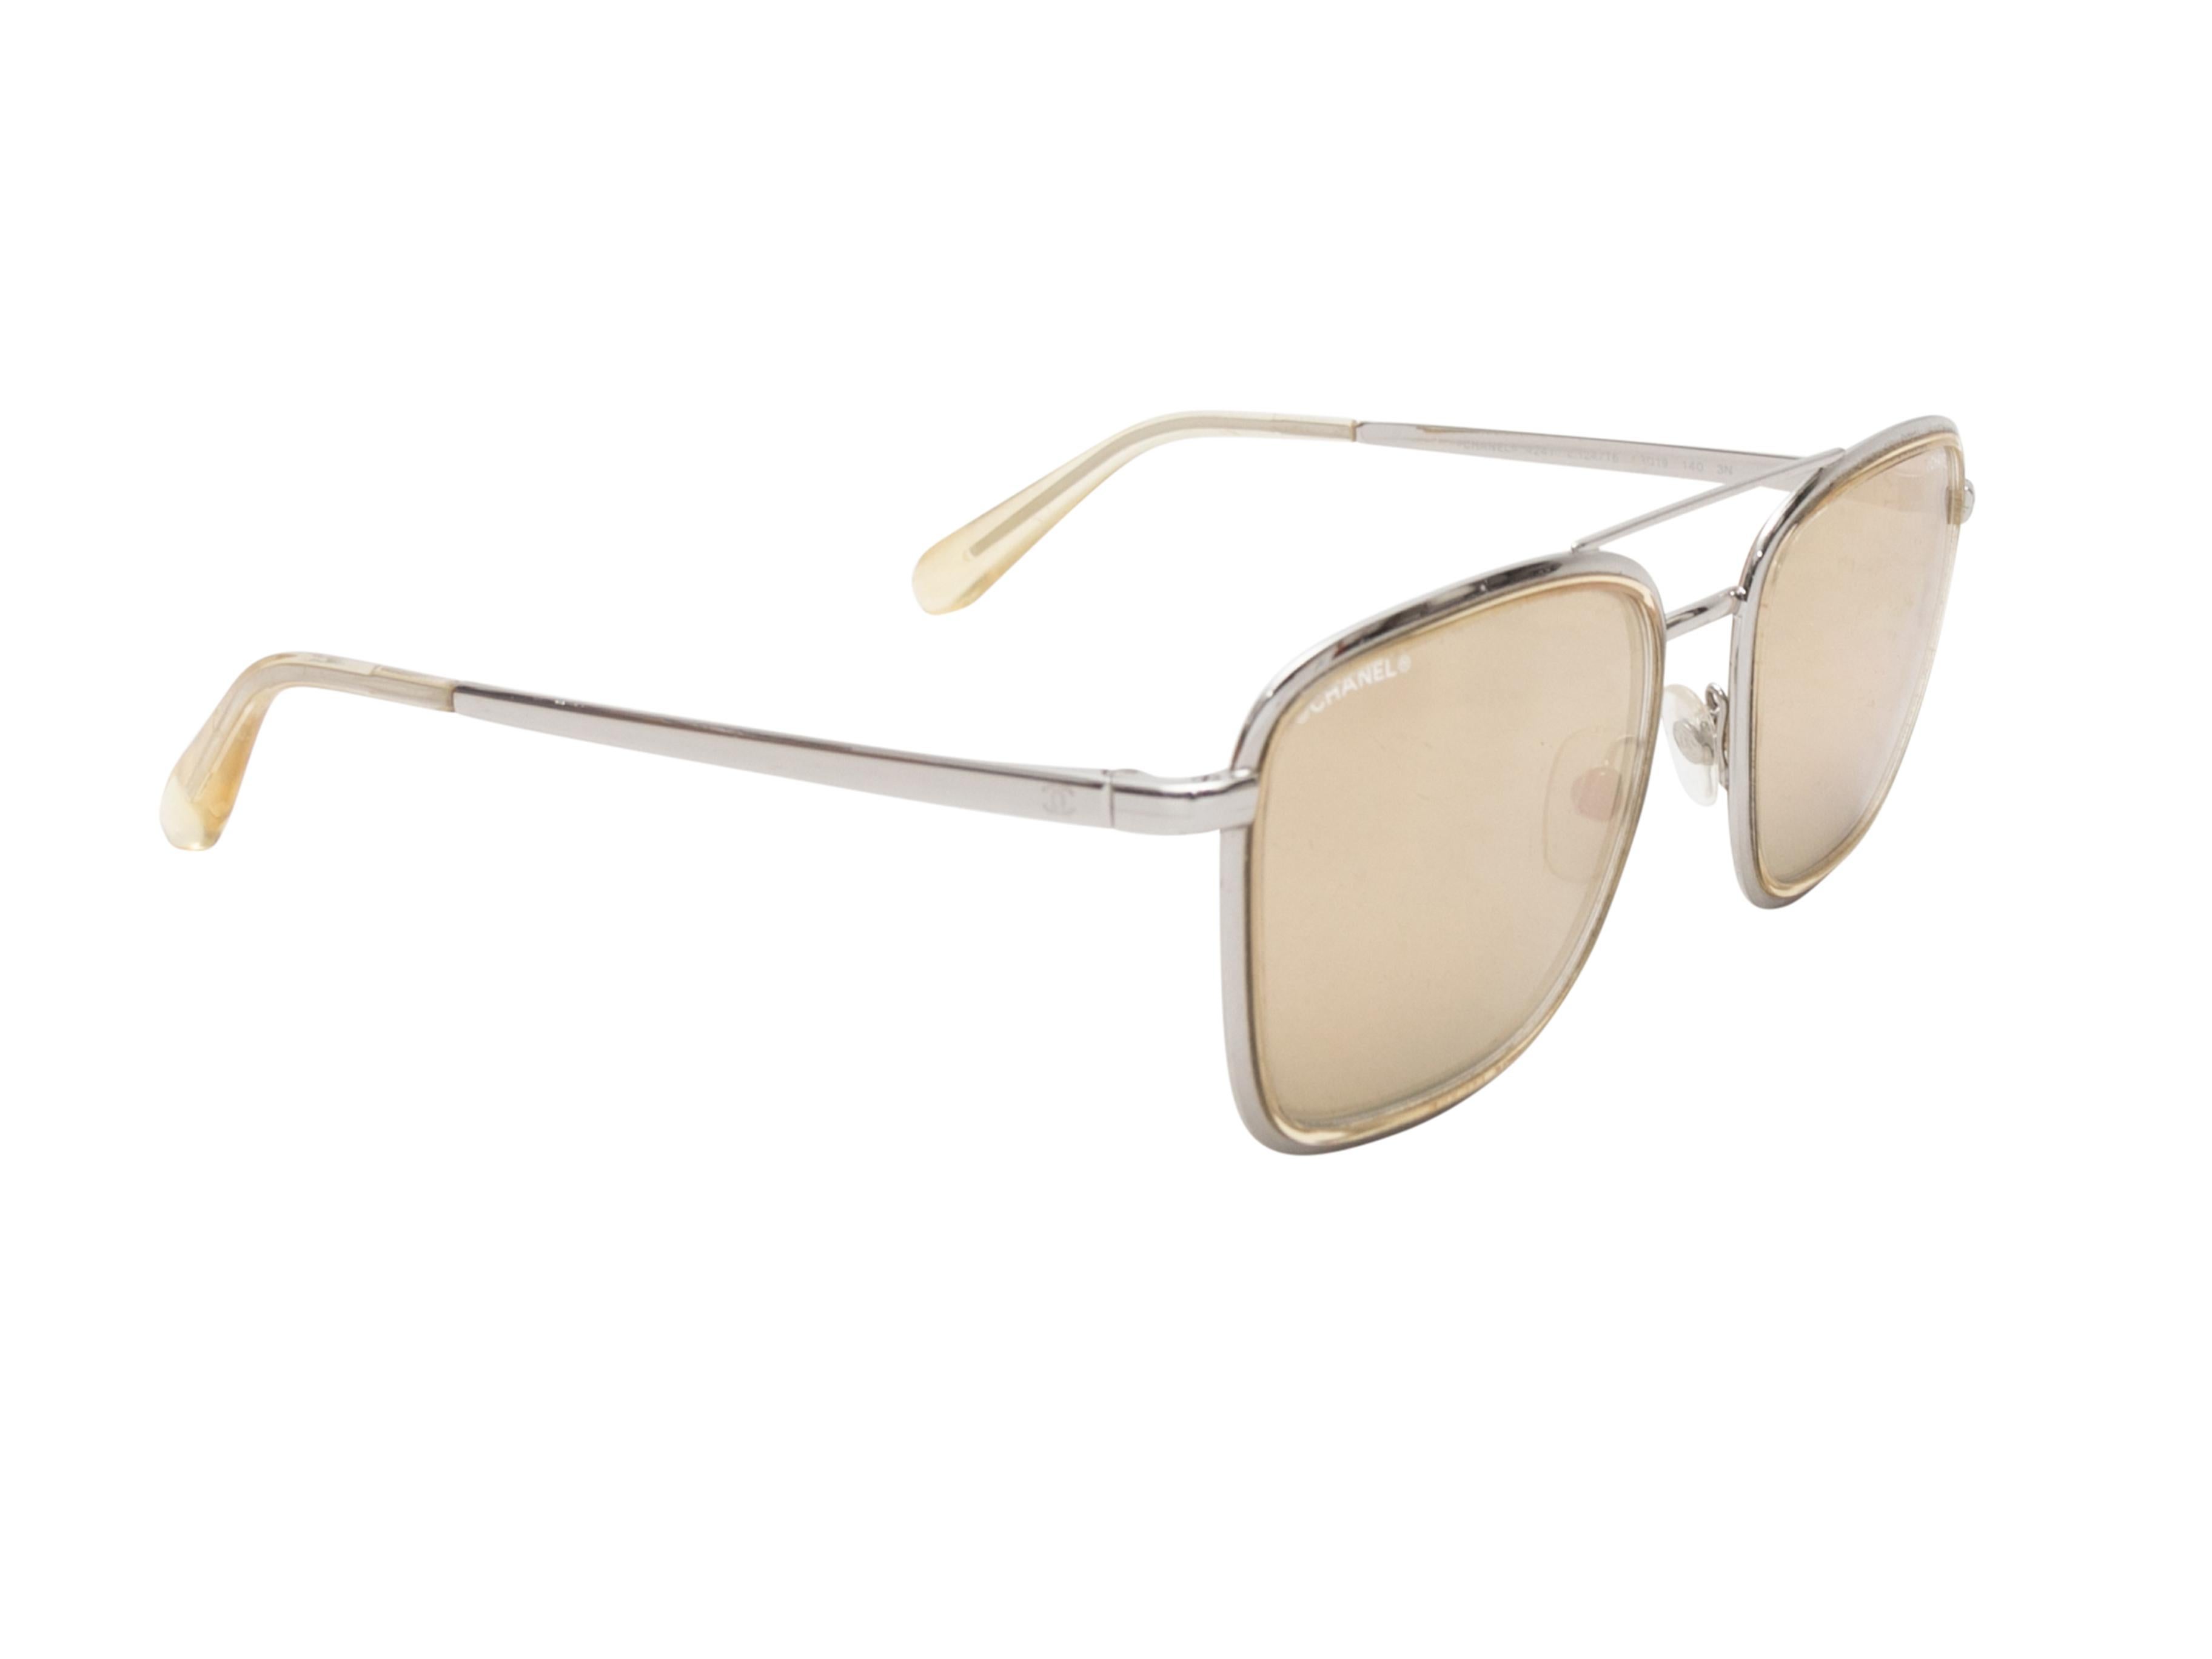 Silver-Tone Chanel Aviator Sunglasses In Good Condition For Sale In New York, NY